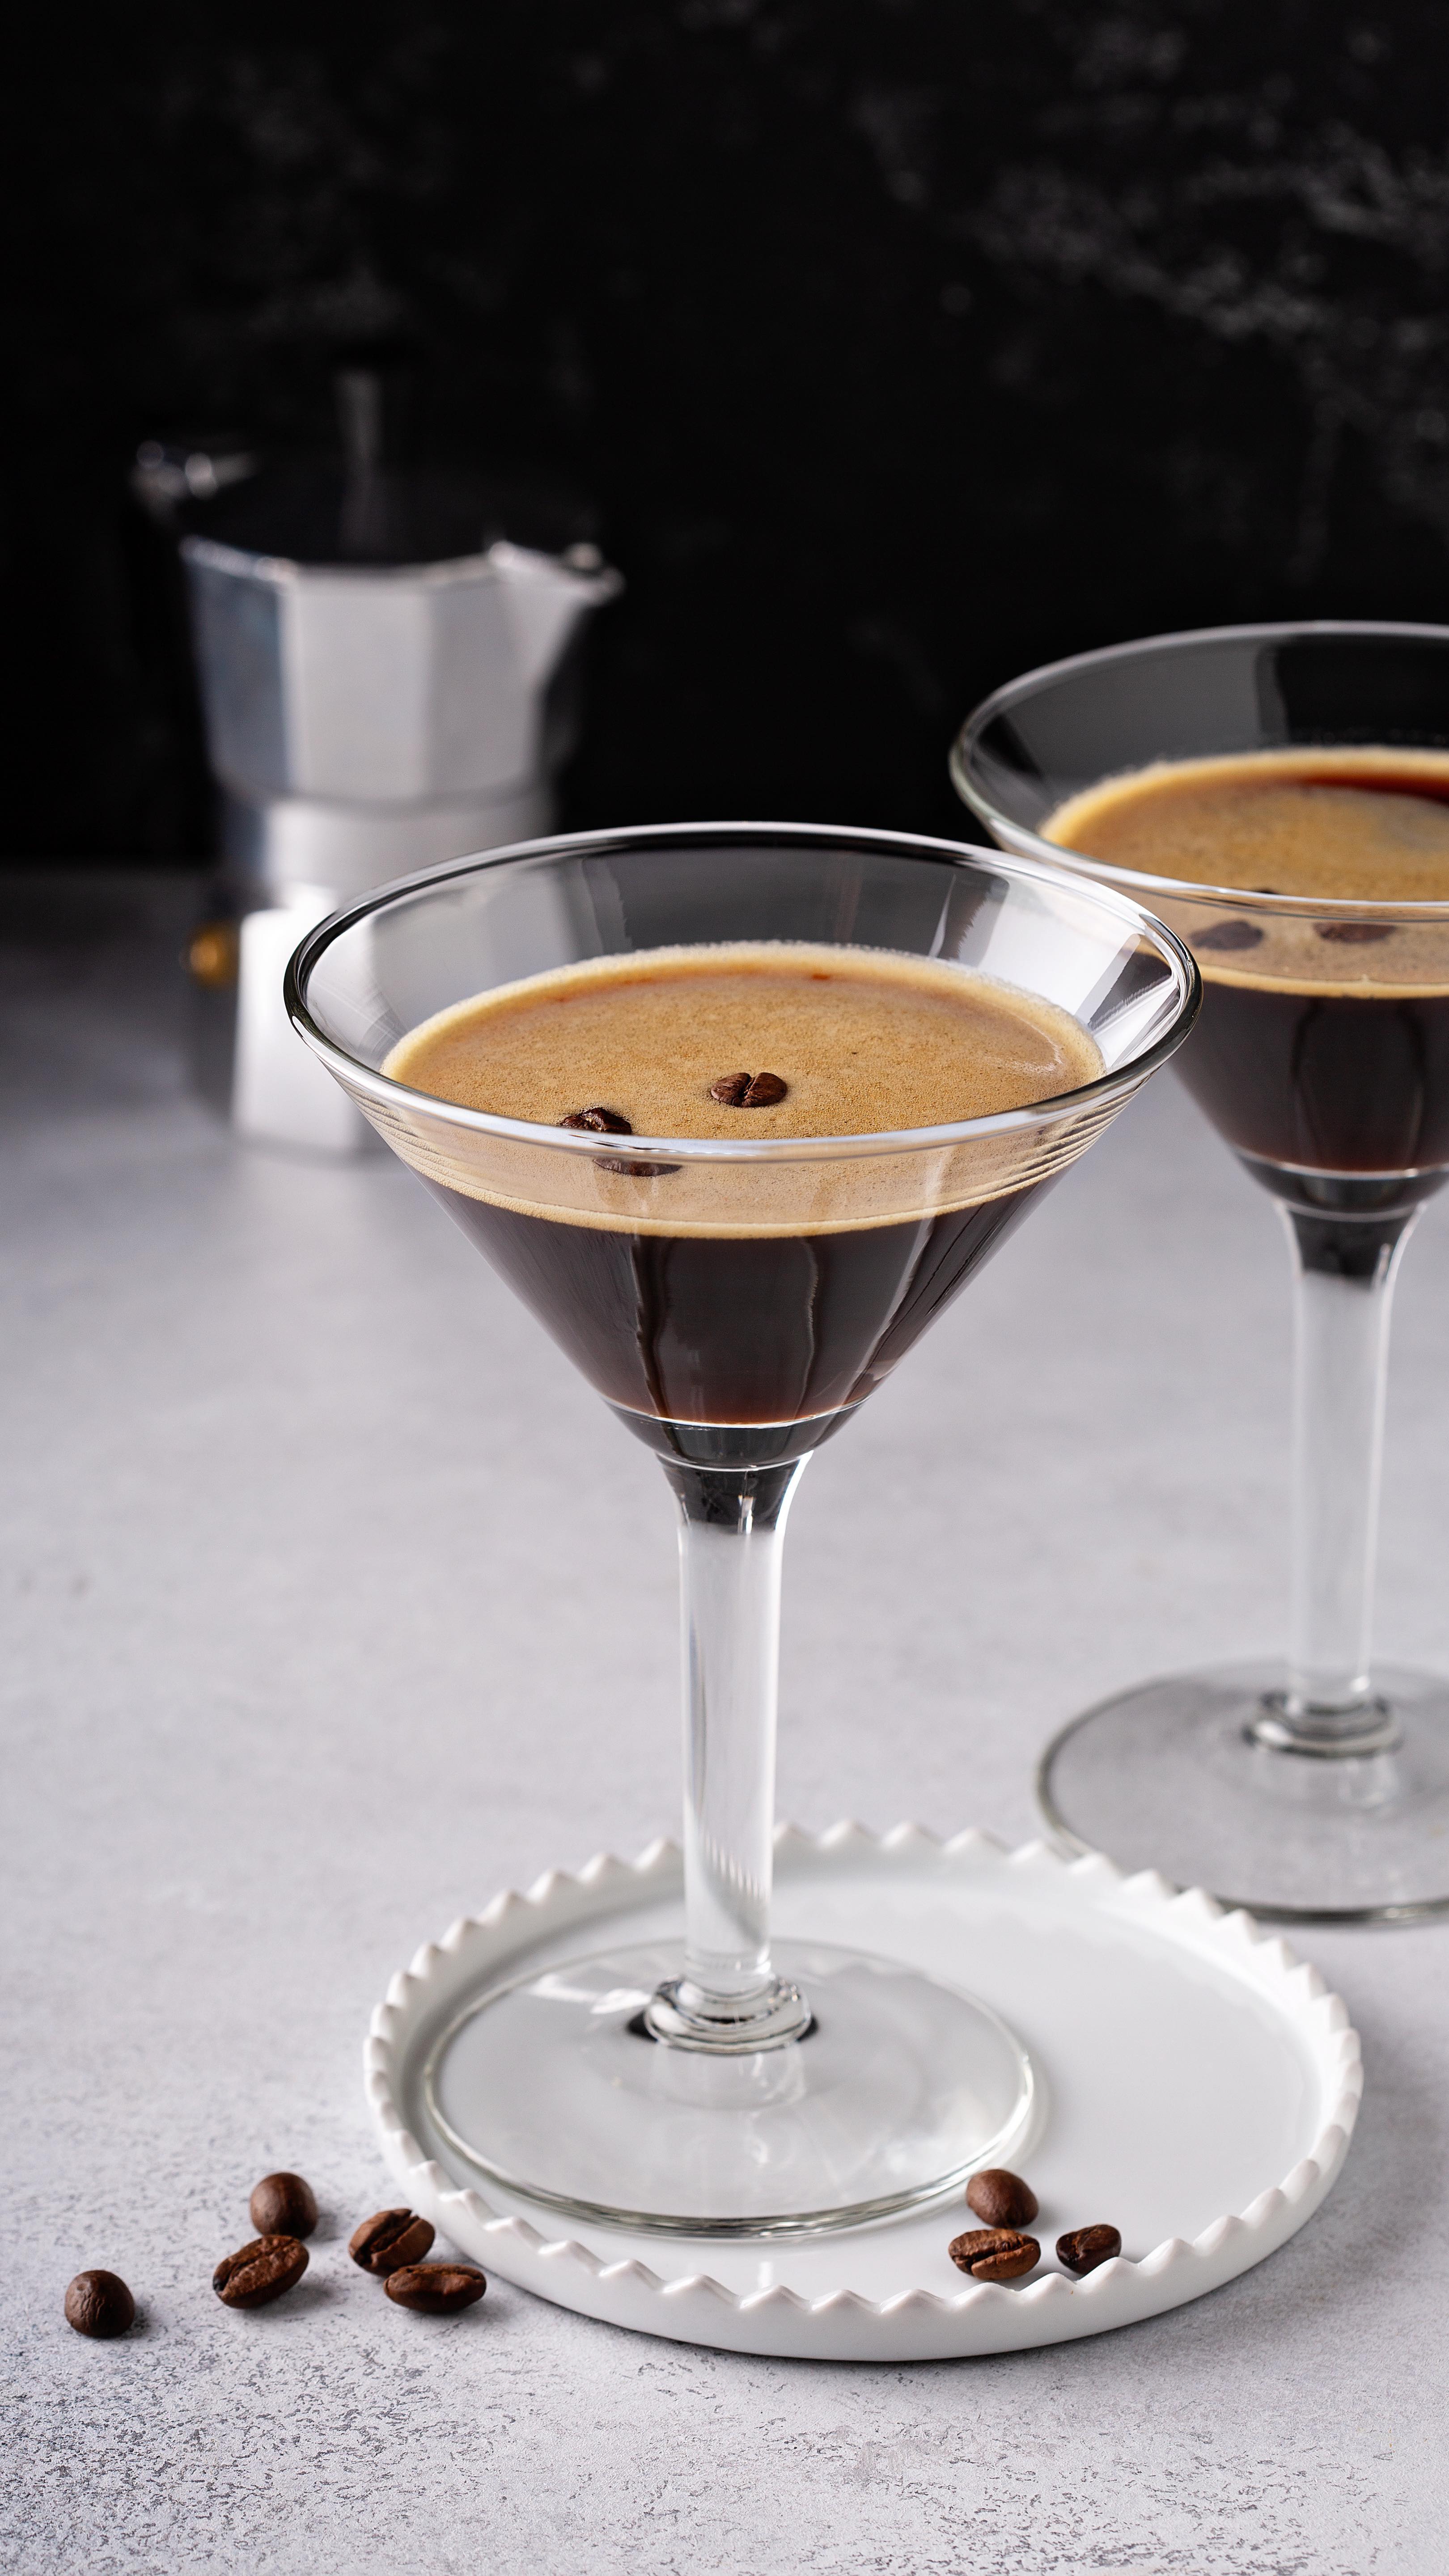 "Mixing it Up" with Robert Nieves...The Espresso Martini

Chilled, creamy, and caffeinated, the famous Espresso Martini fulfills every coffee lover's dream. Tune in as ELITE Mixologist Robert Nieves shows us how to create this perfect after-dinner or pre-party cocktail with only a few ingredients.

#espressomartini#espresso#coffee#alcoholicdrinks#cocktail#alcohol#hardliquor#rum#caffeine#mixology#mixologyguide#mixologyart